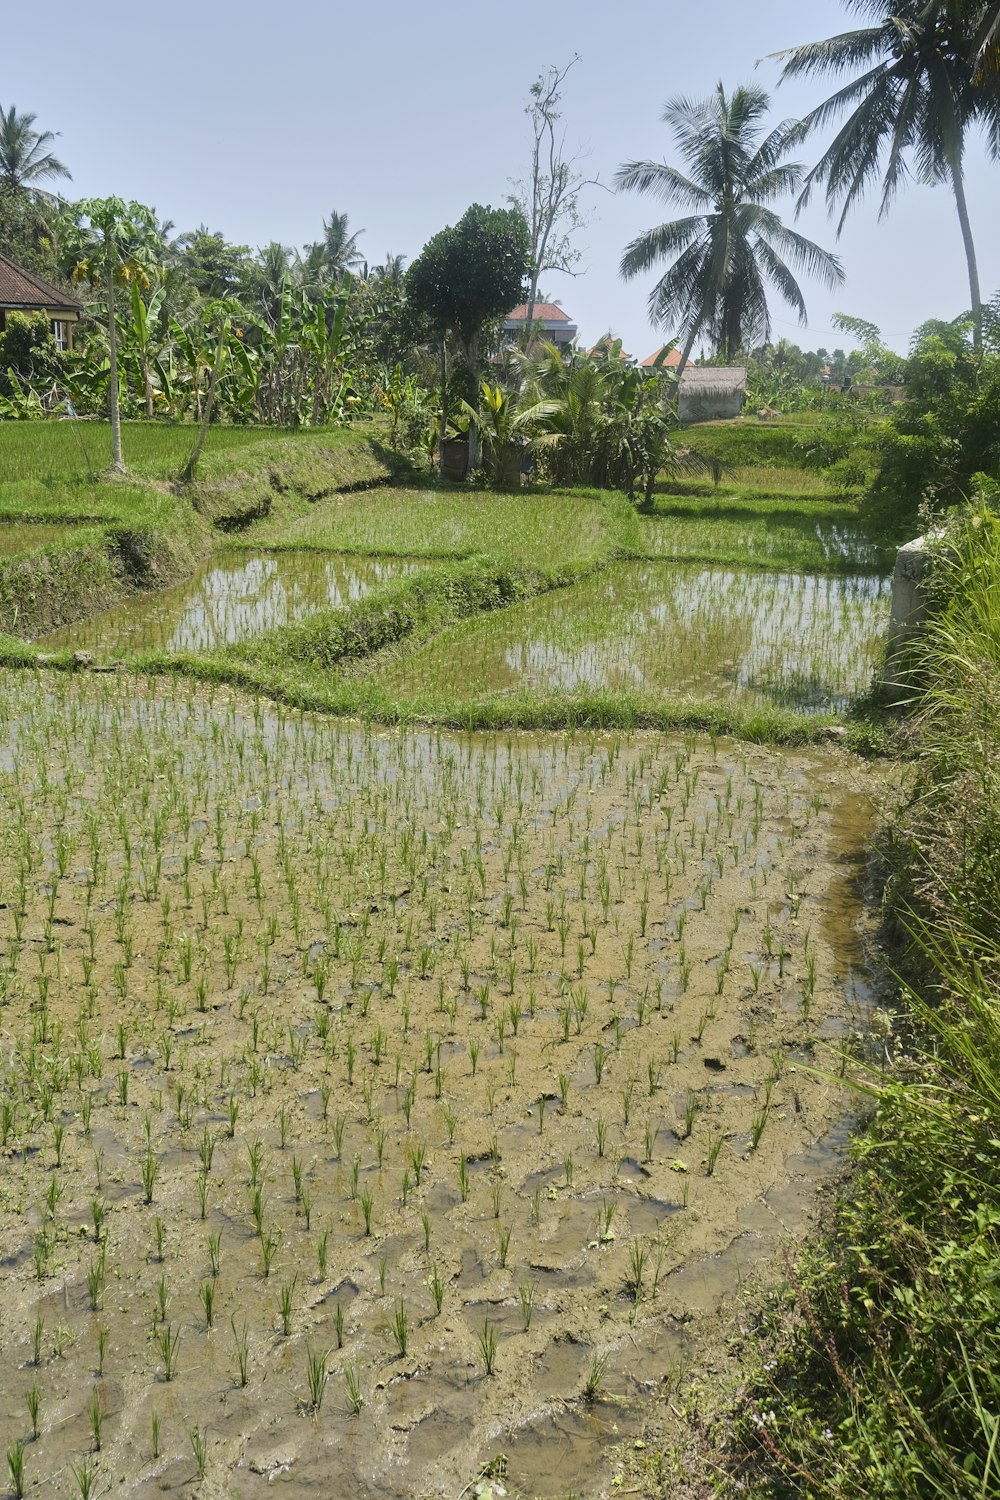 a rice field with a small house in the background